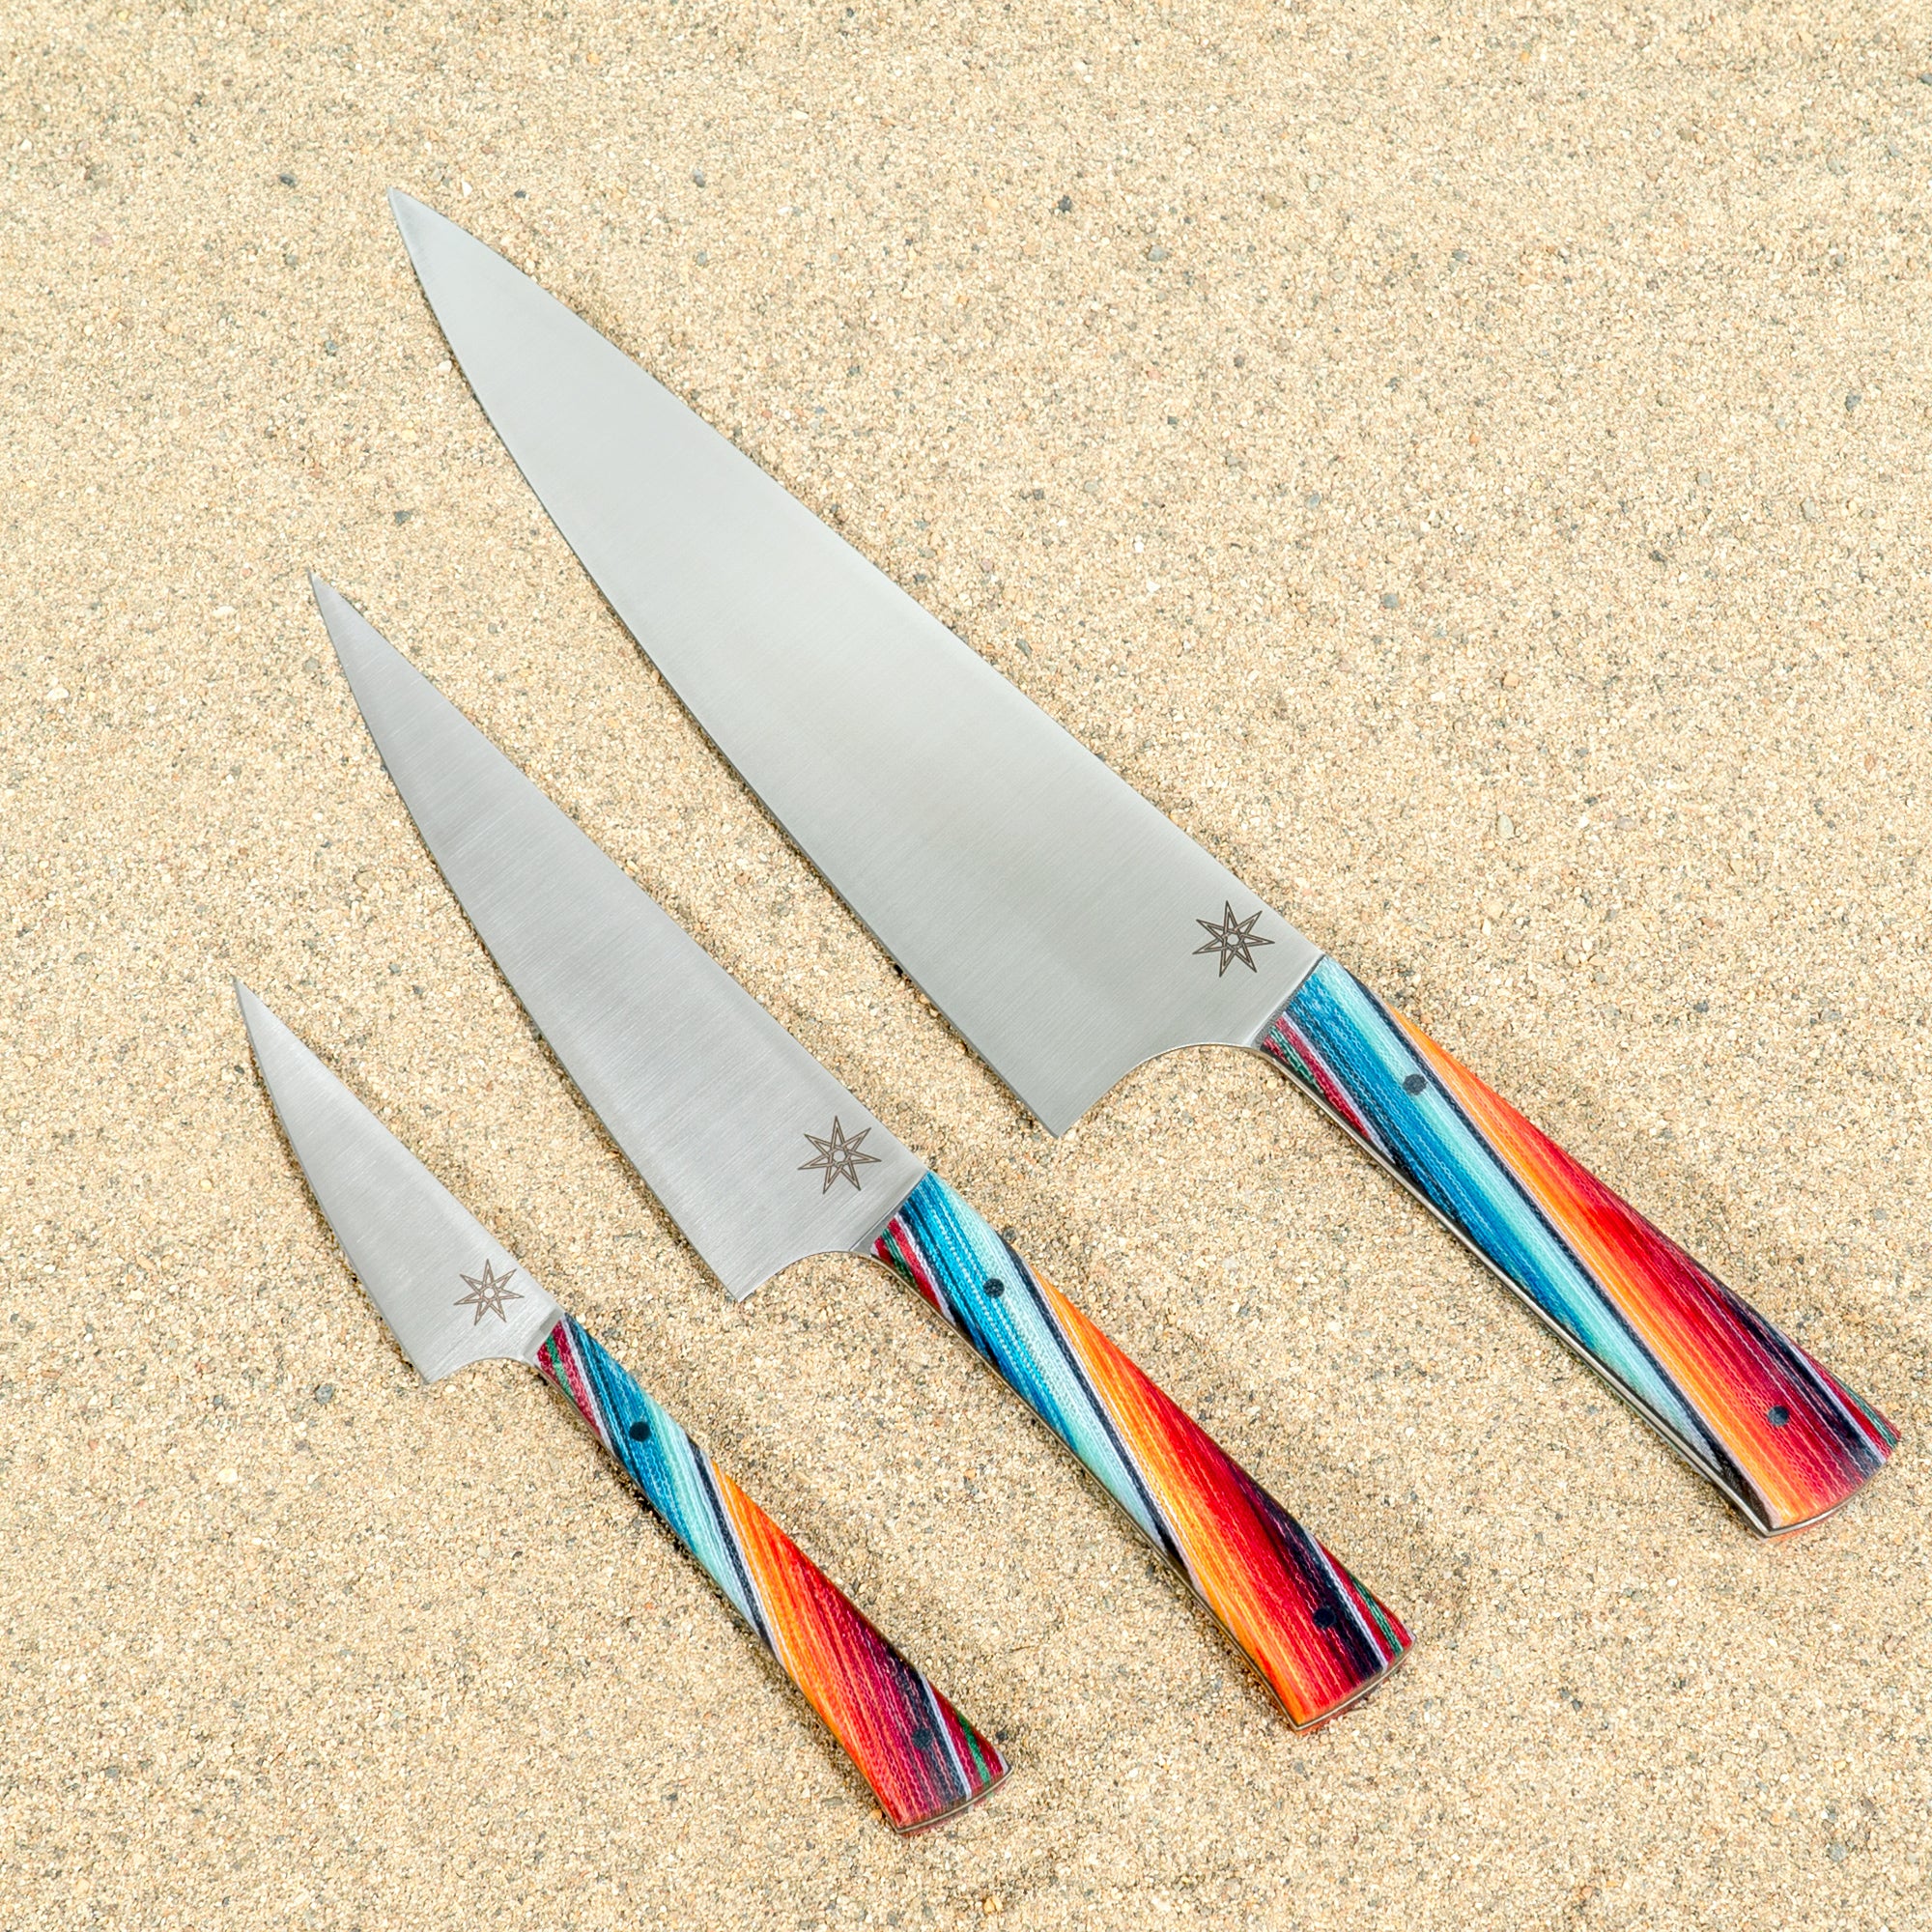 Baja Sous Chef Set from Town Cutler. Kitchen knife set with three knives. 8.5" Chef Knife, 6" Utility Knife, and 3" Paring knife with colorful Mexican blanket pattern handles.